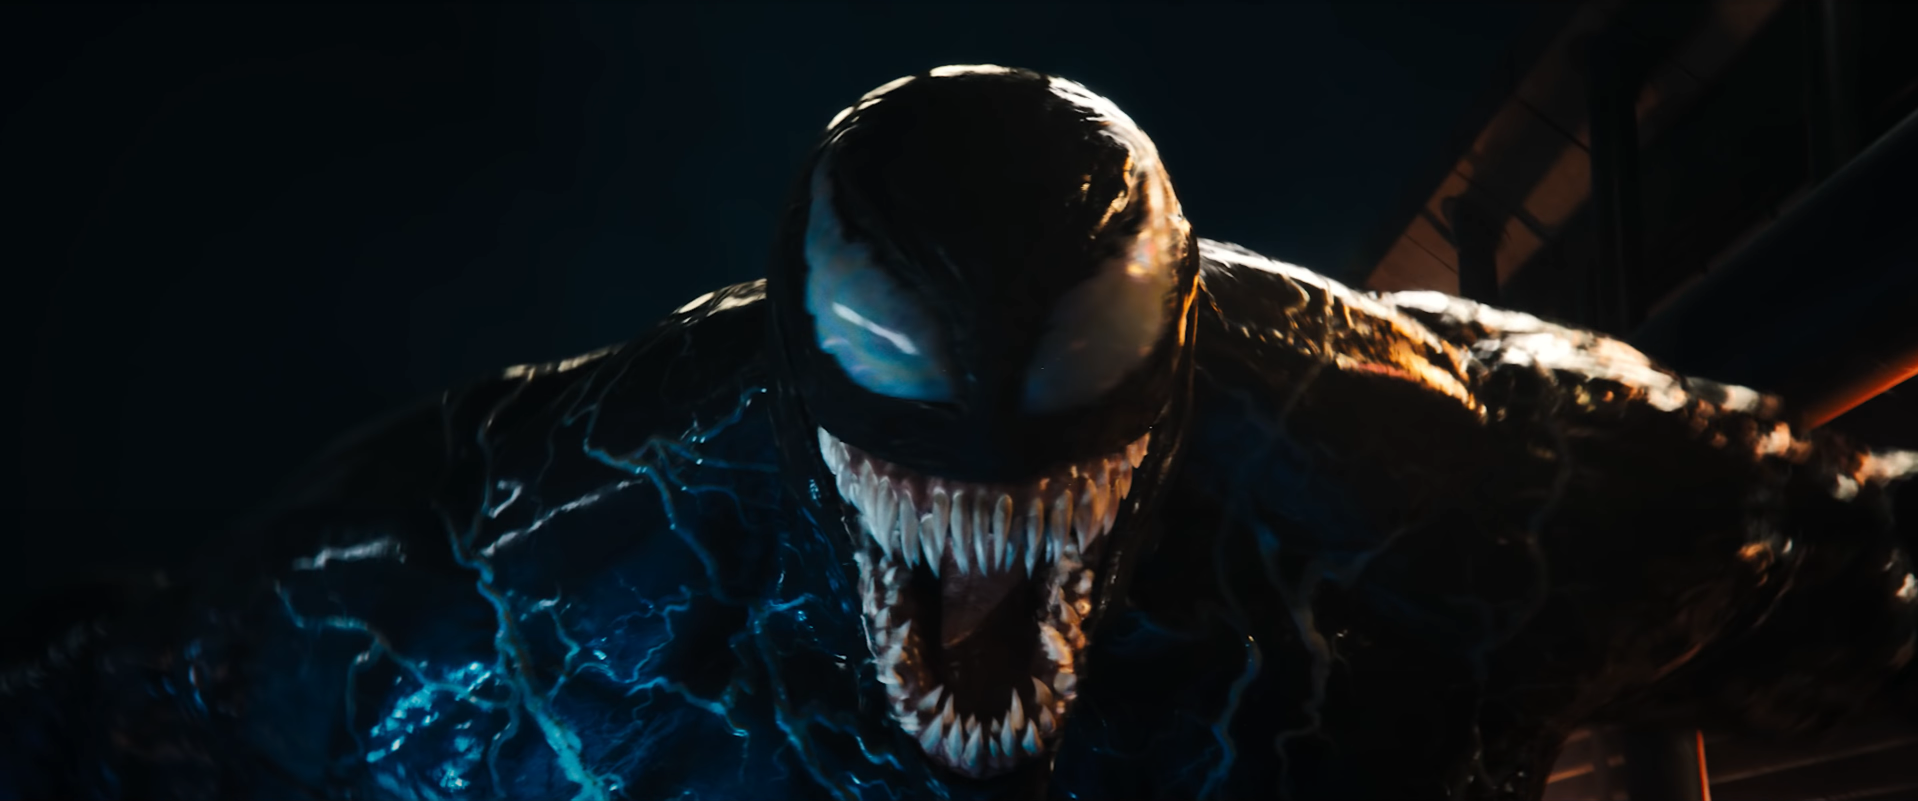 Sony announced "Venom 3" and "Ghostbusters 4